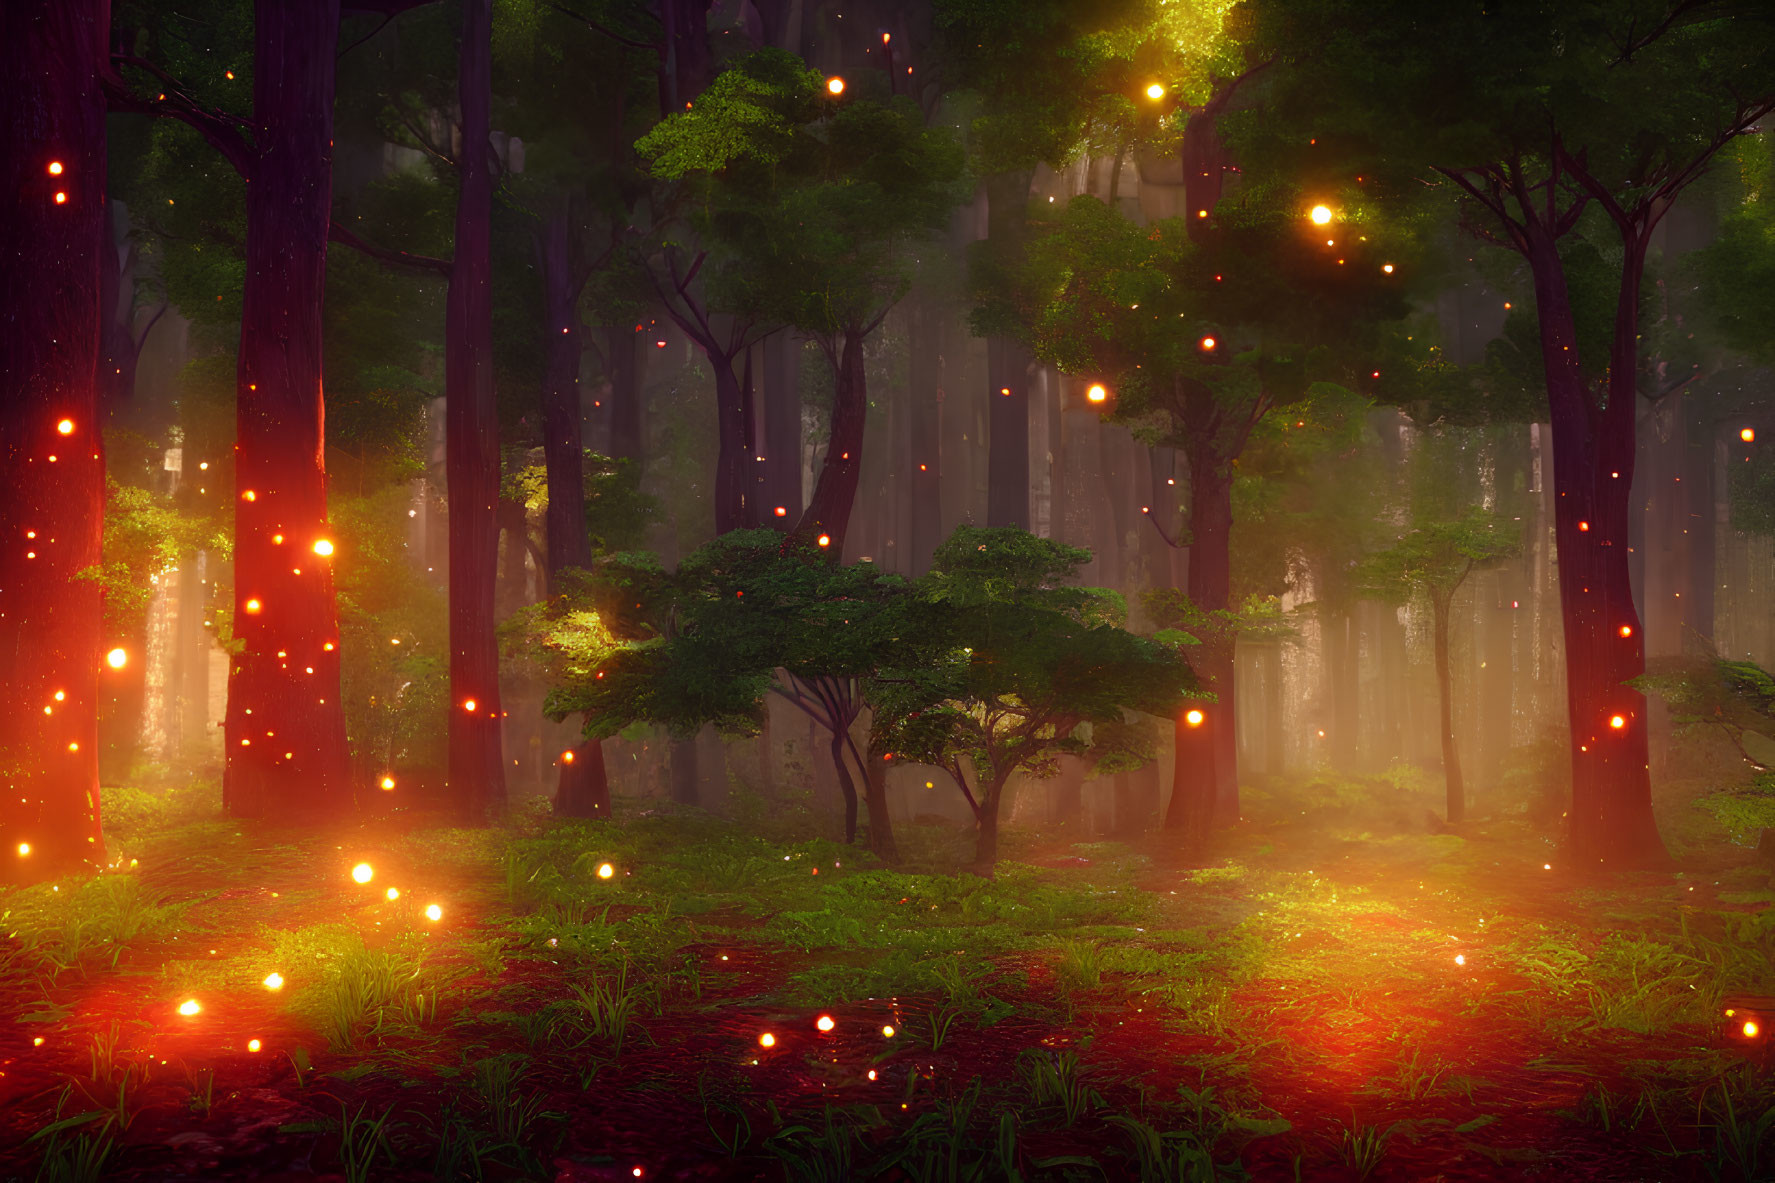 Mystical forest scene with fireflies, sunbeams, and glowing floor